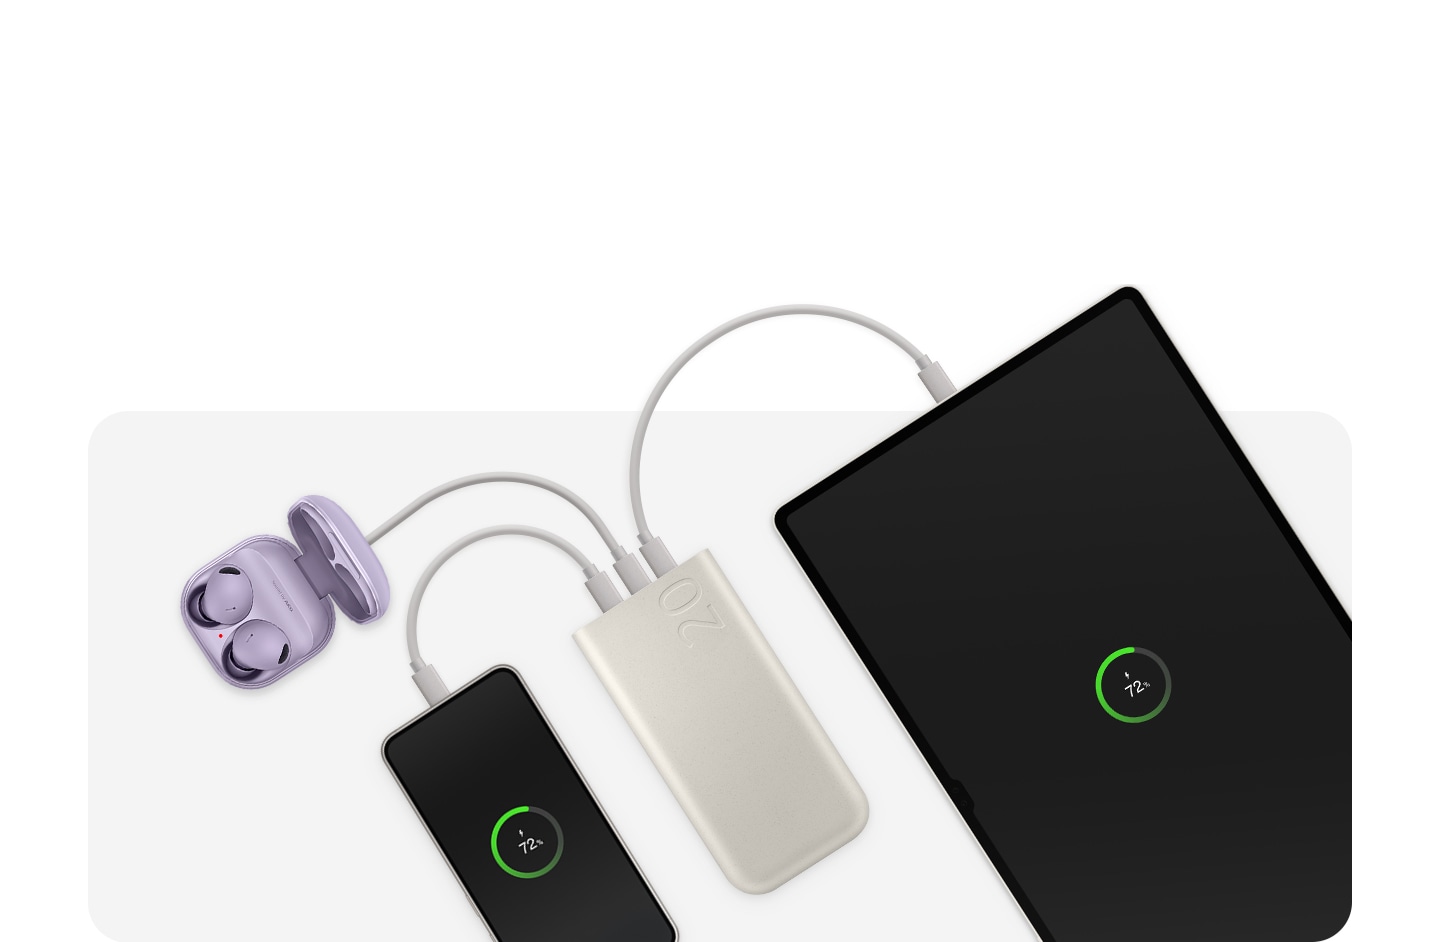 An arrangement of electronic devices including a smartphone, a tablet, and a pair of wireless earbuds, all connected to a portable grey battery pack, indicating simultaneous charging with a visible battery level of 72% on the devices' screens.